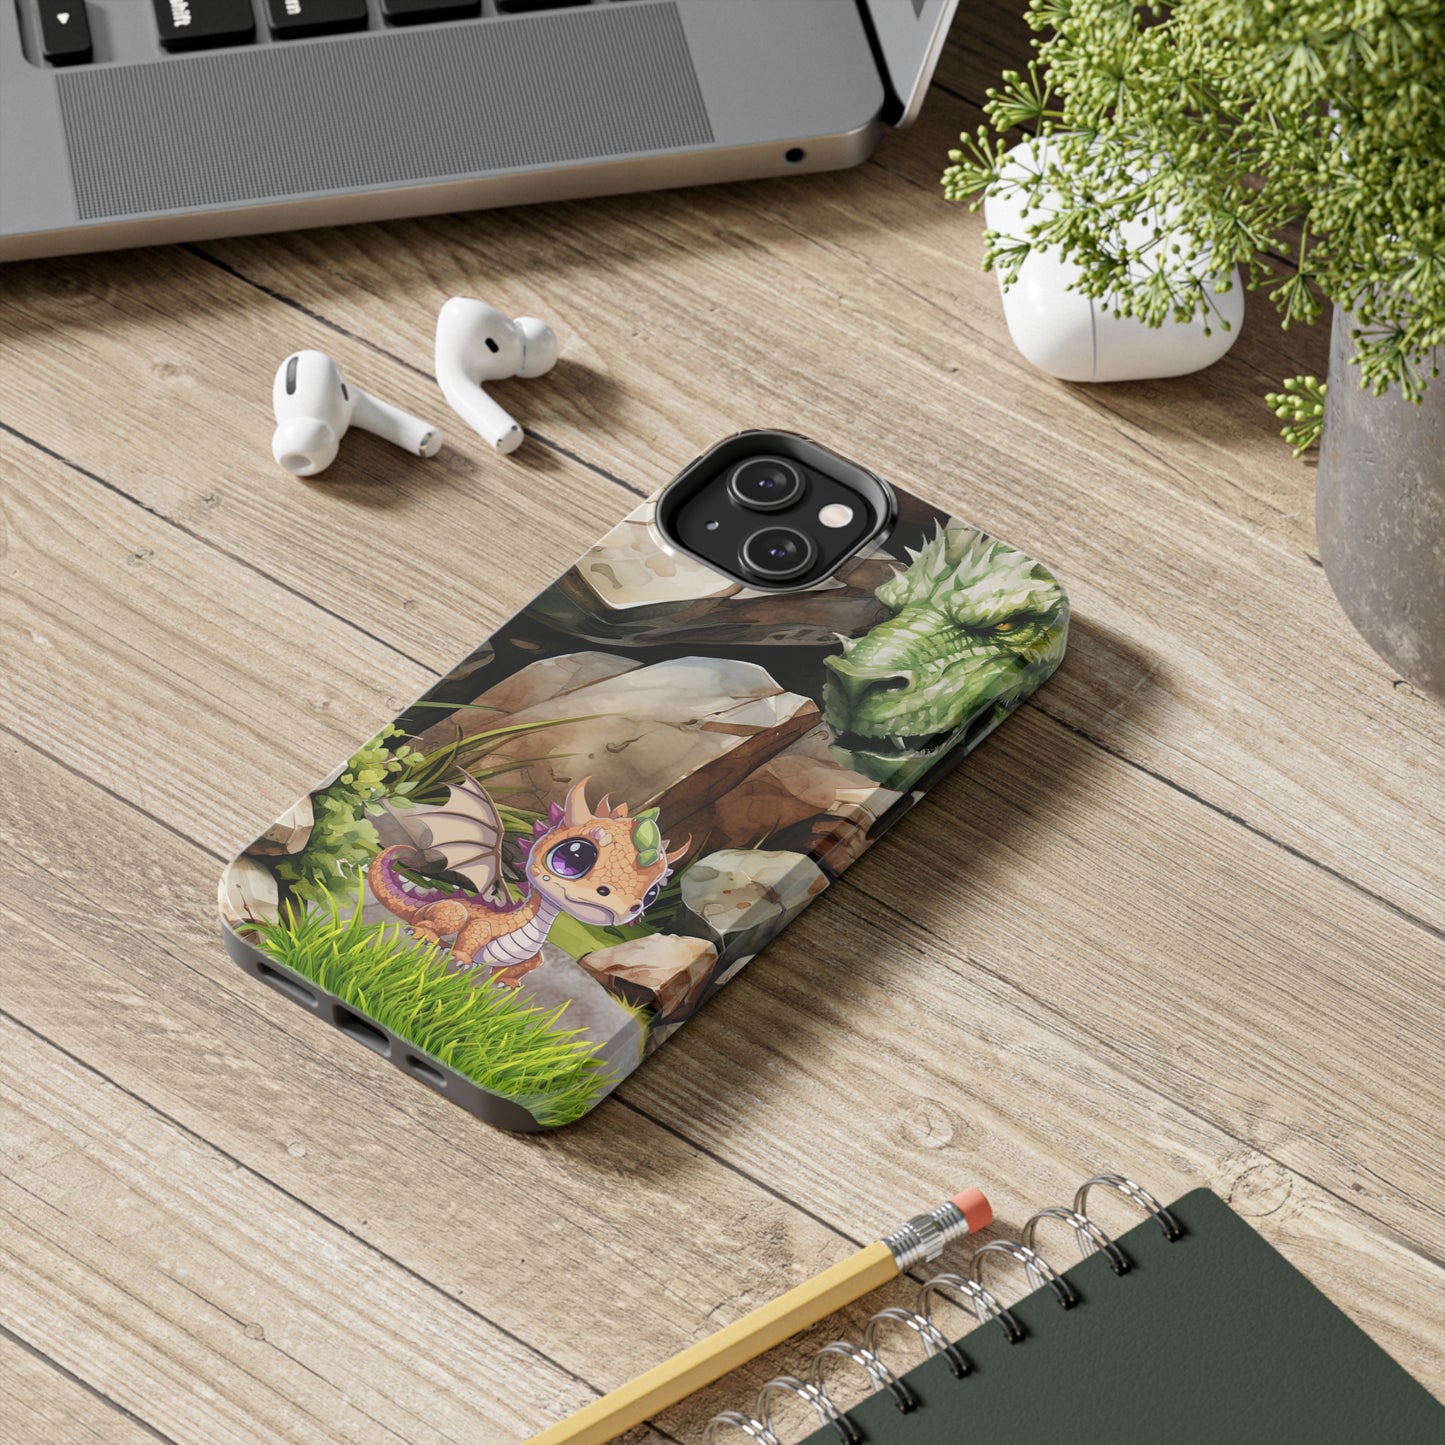 Daddy's Girl: iPhone Tough Case Design - Wireless Charging - Superior Protection - Original Graphics by TheGlassyLass.com